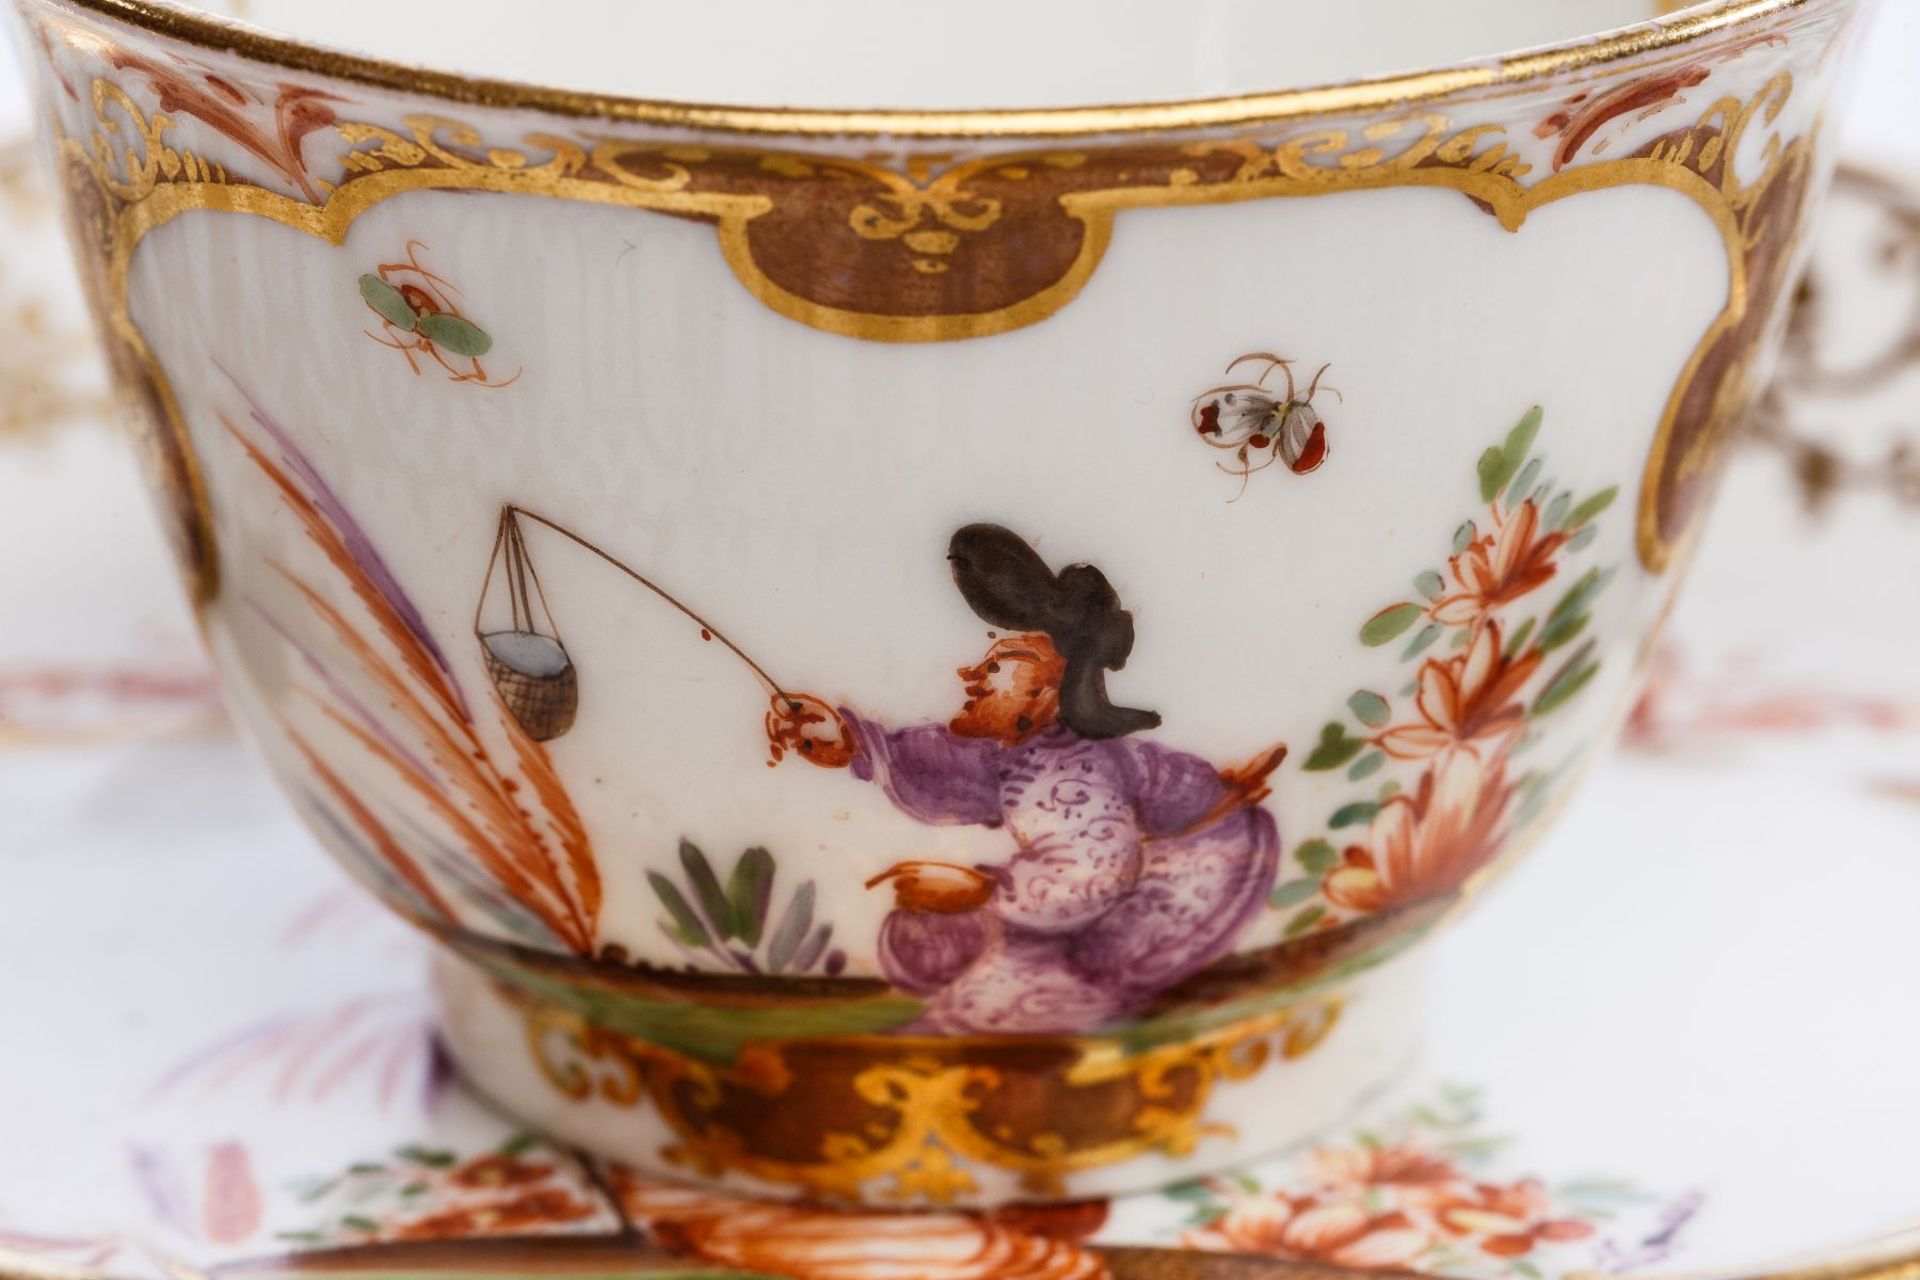 Bowl with saucer, Meissen 1730/35 - Image 5 of 6